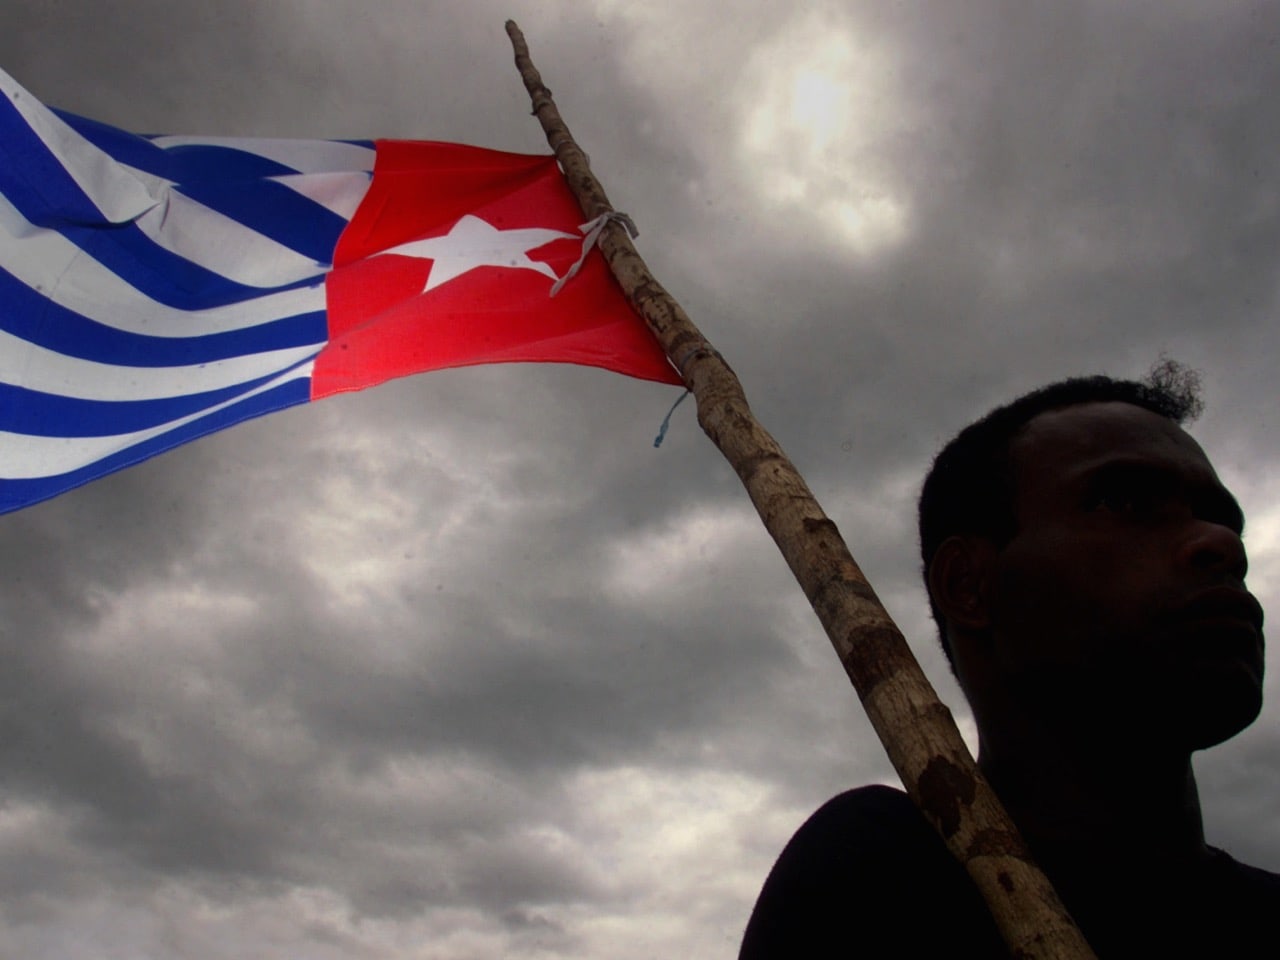 In this 17 November 2001 file photo, a Papuan holds the Morning Star independence flag during the funeral of a prominent independence leader in Sentani, West Papua, REUTERS/Darren Whiteside